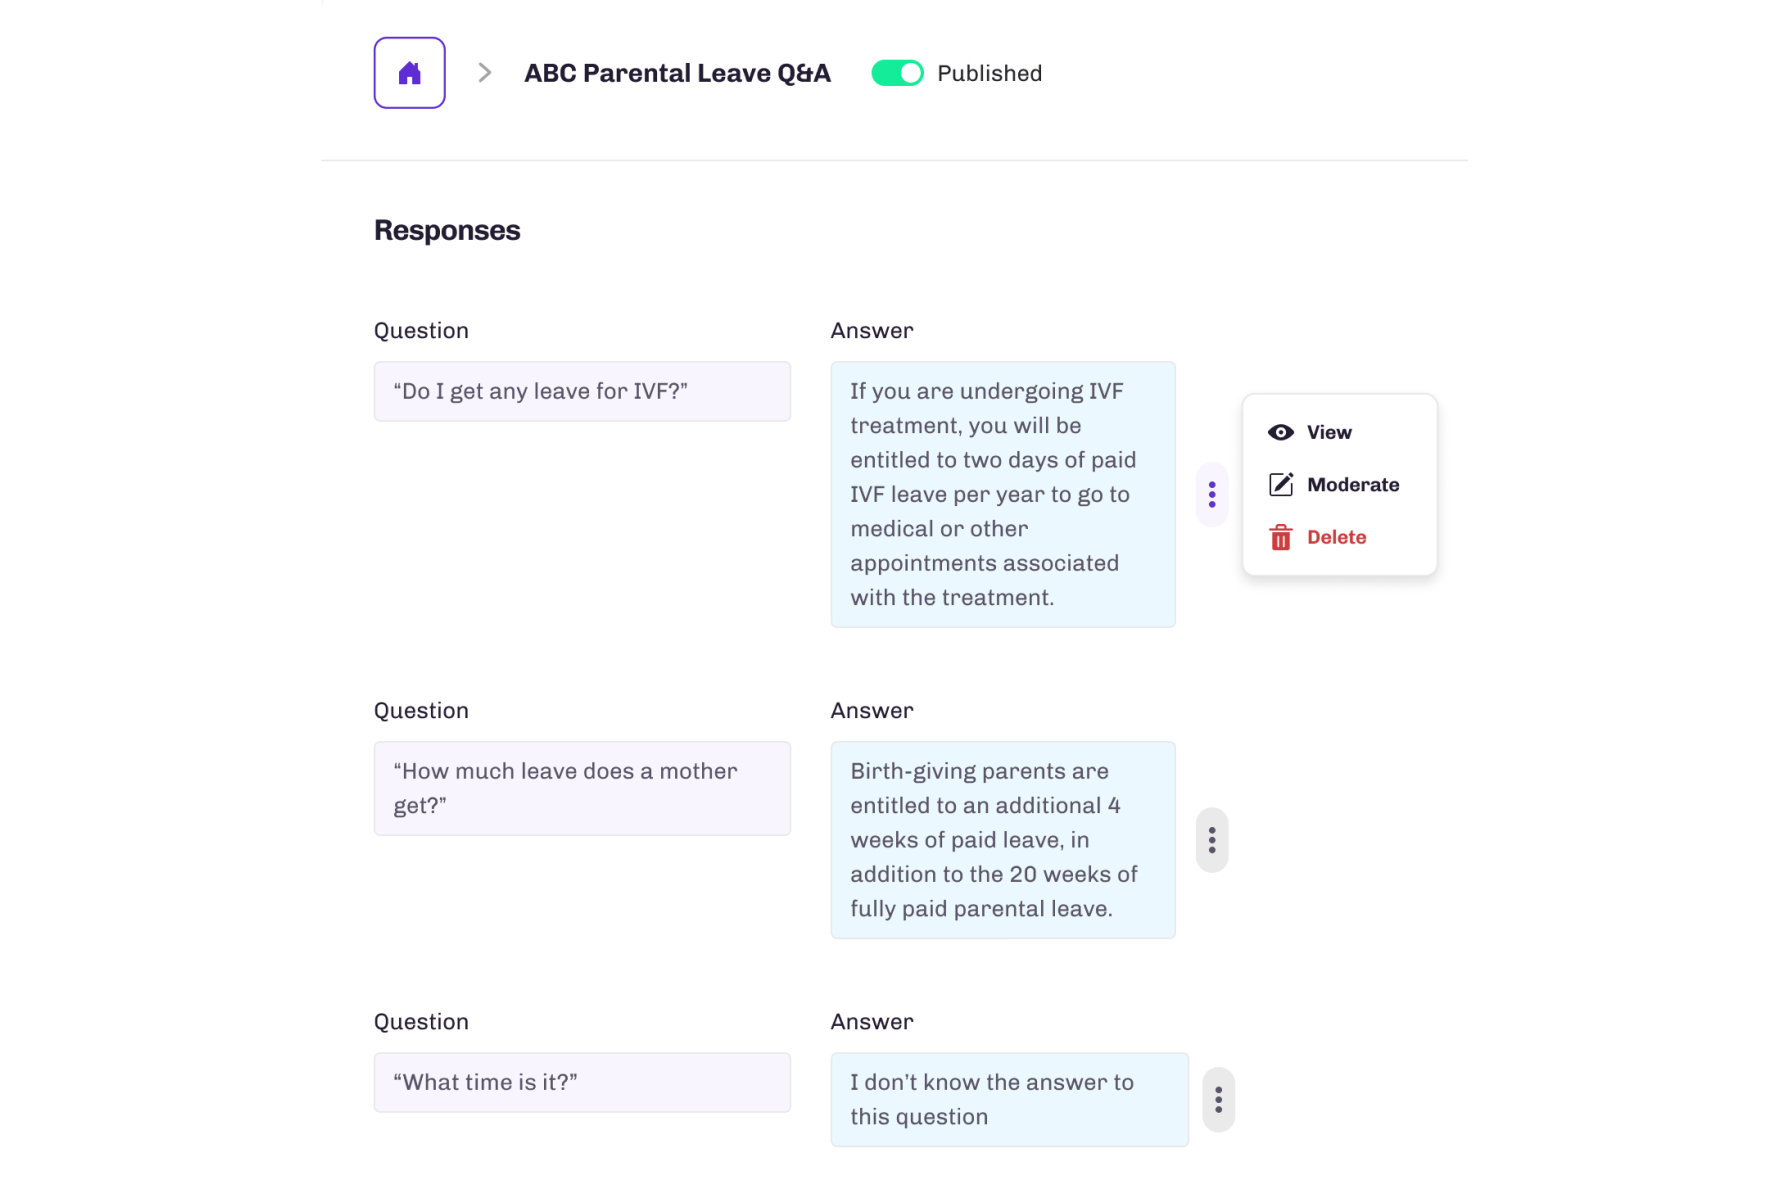 Josef Q creators can review a record of all their users' questions and answers generated by Q&As for review and moderation.